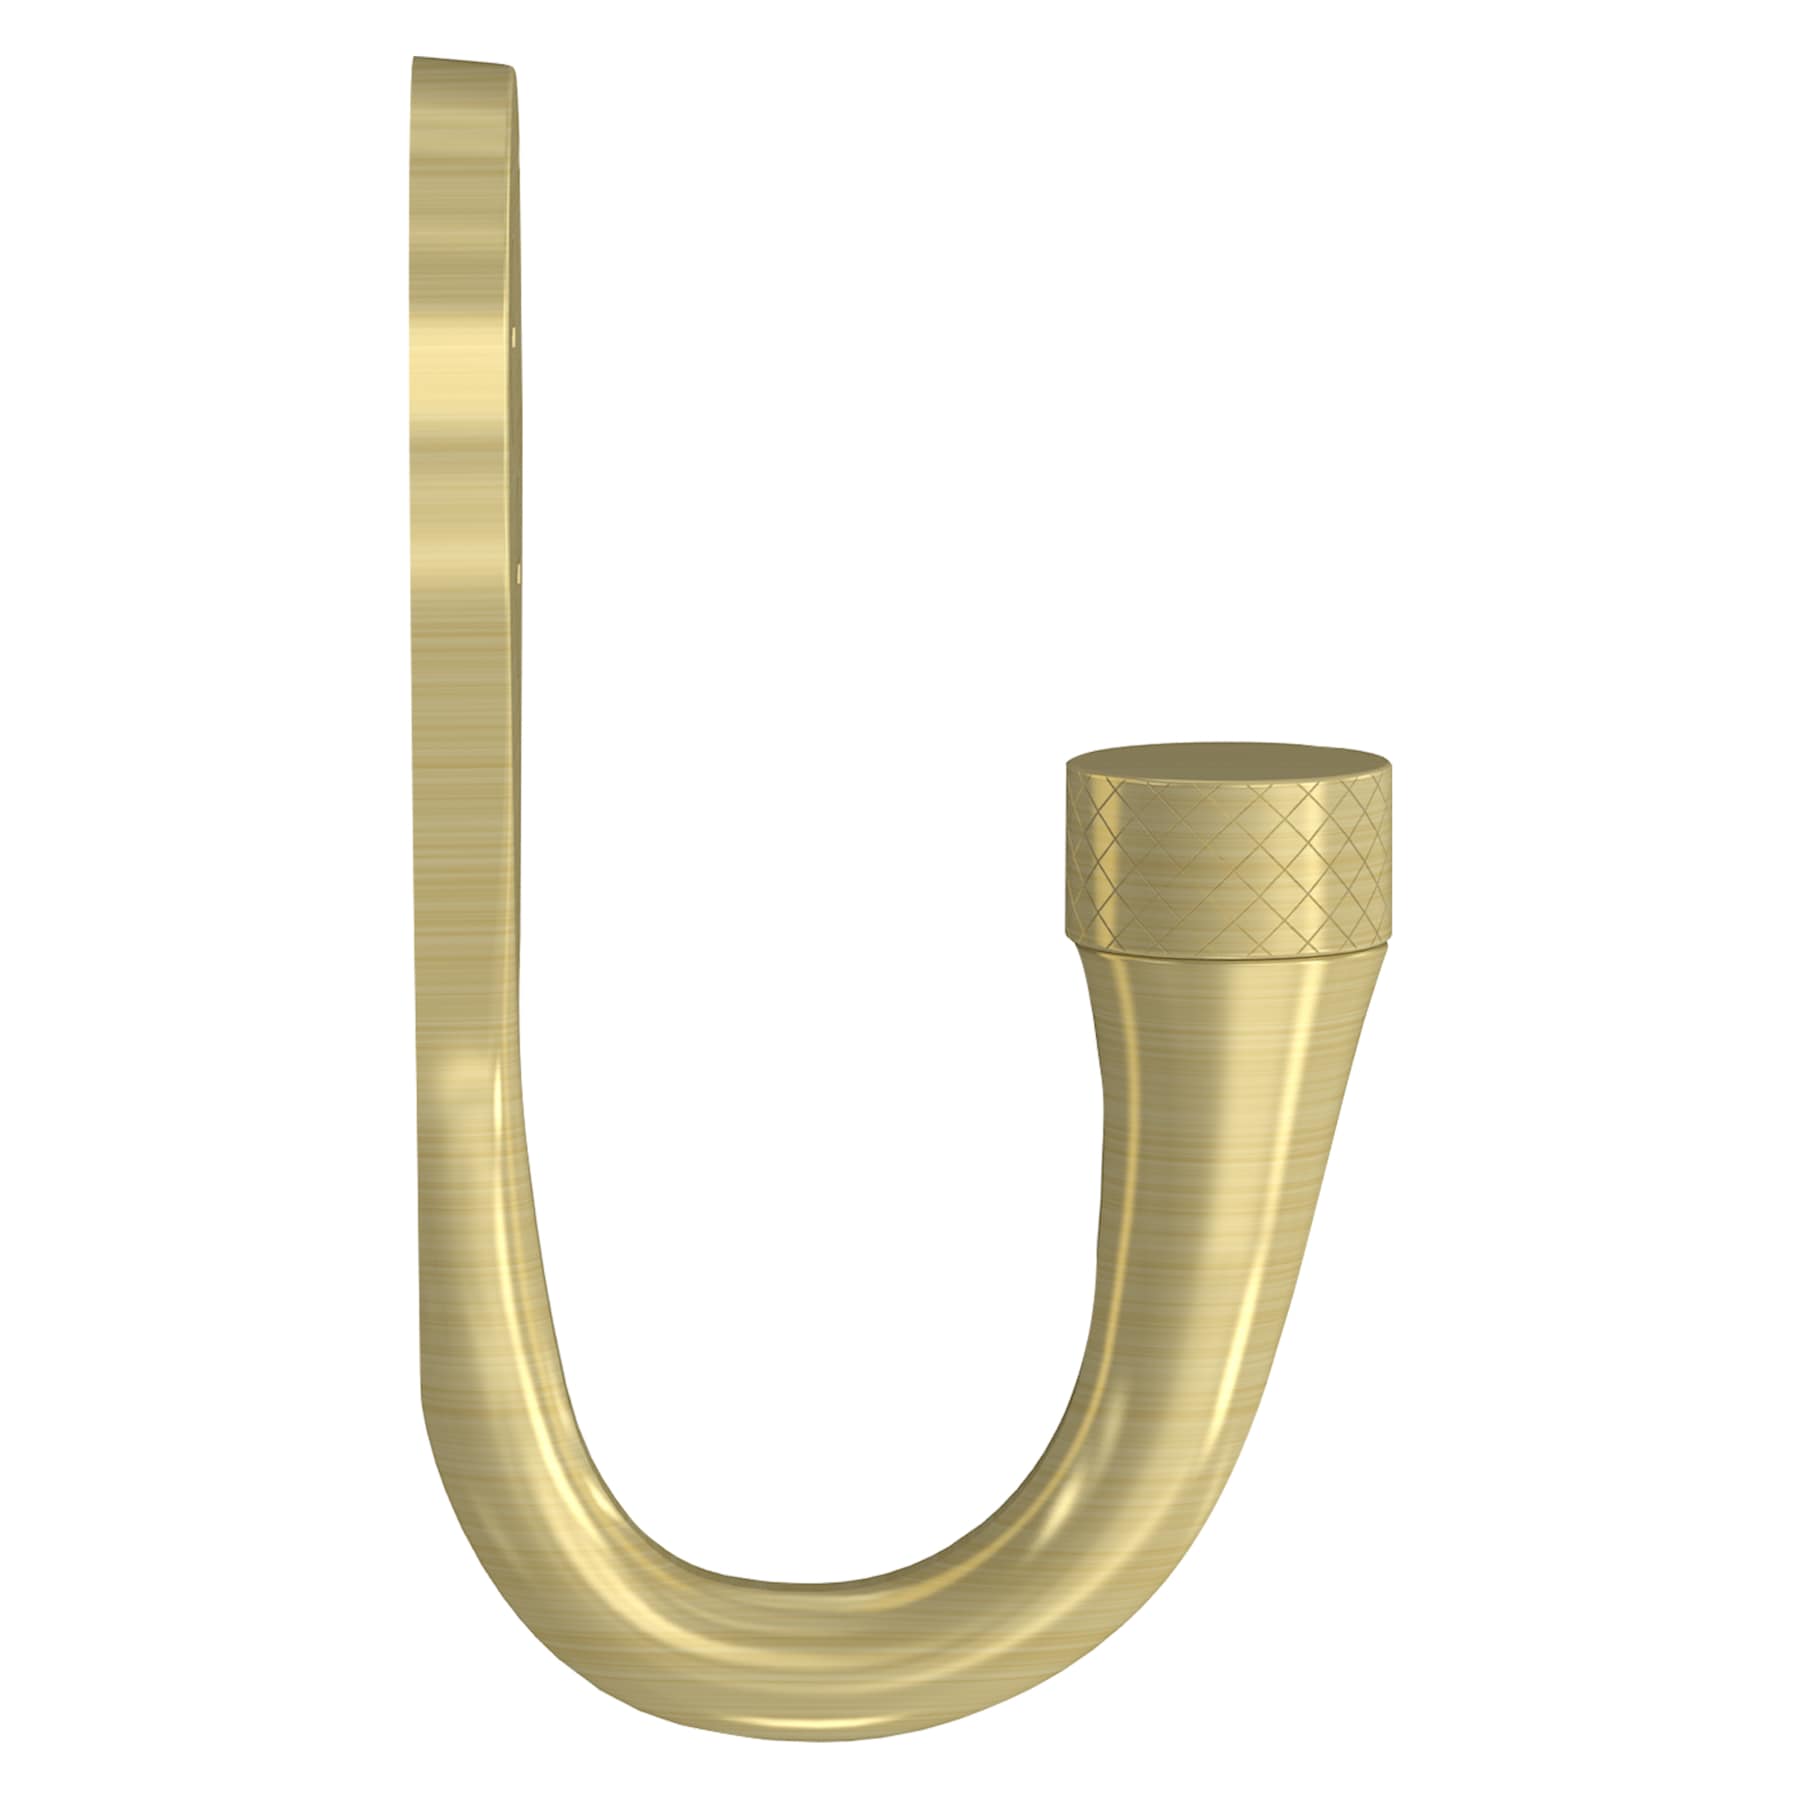 5 x Brass Plated Cup Hooks Shiny Gold Wall Screw in Hat Coat Bag Pegs Hangers UK. Unbranded. Hooks & Eyes. 5057502062895.